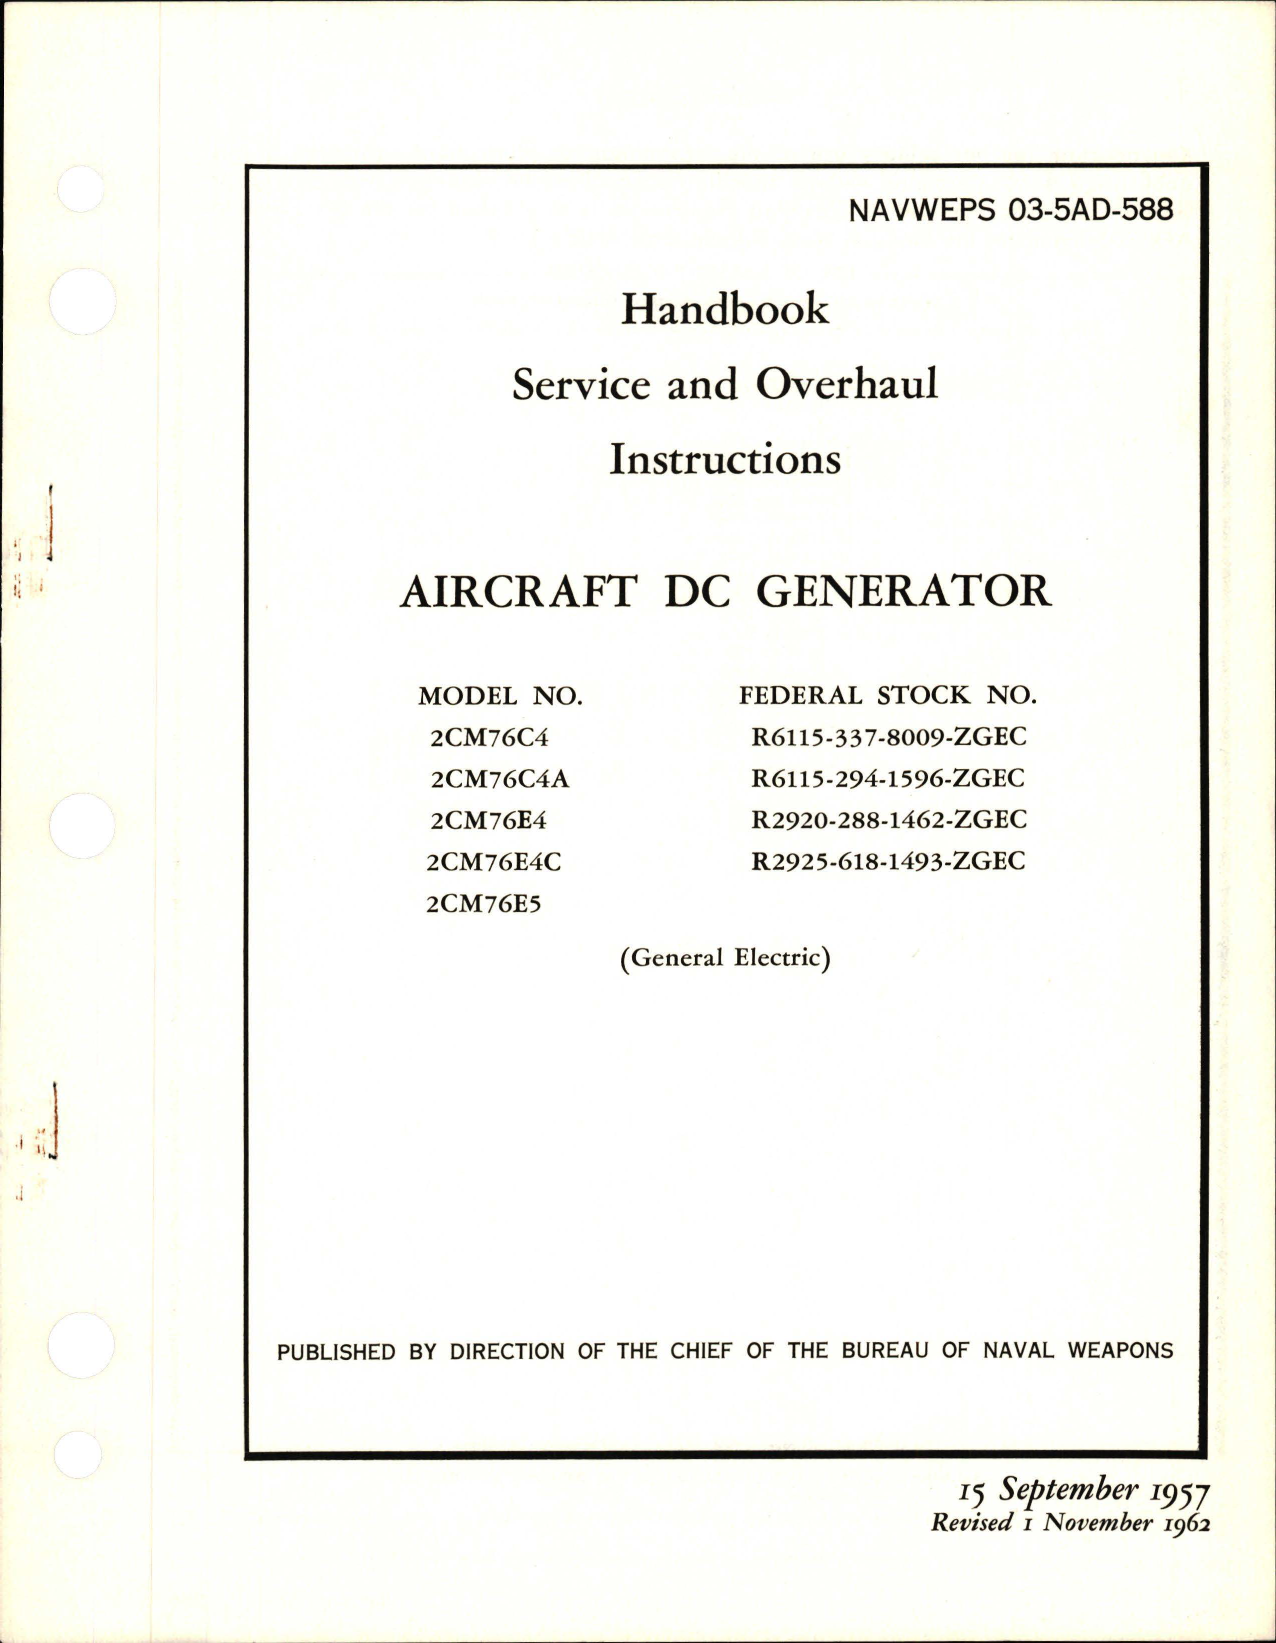 Sample page 1 from AirCorps Library document: Service and Overhaul Instructions for DC Generator - Models 2CM76C4, 2CM76C4A, 2CM76E4, 2CM76E4C, and 2CM76E5 